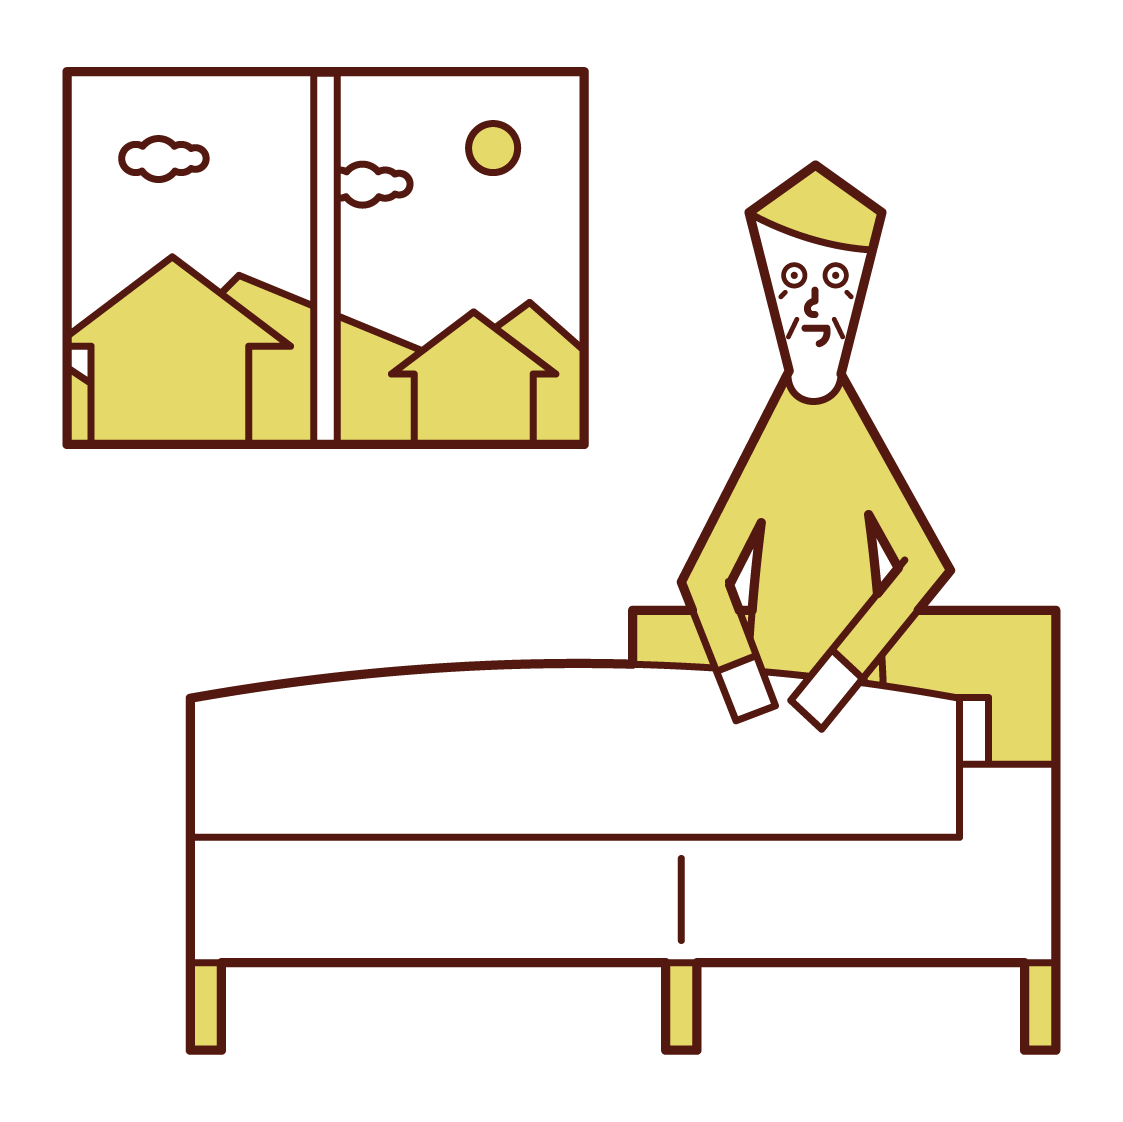 Illustration of a person (grandfather) who wakes up